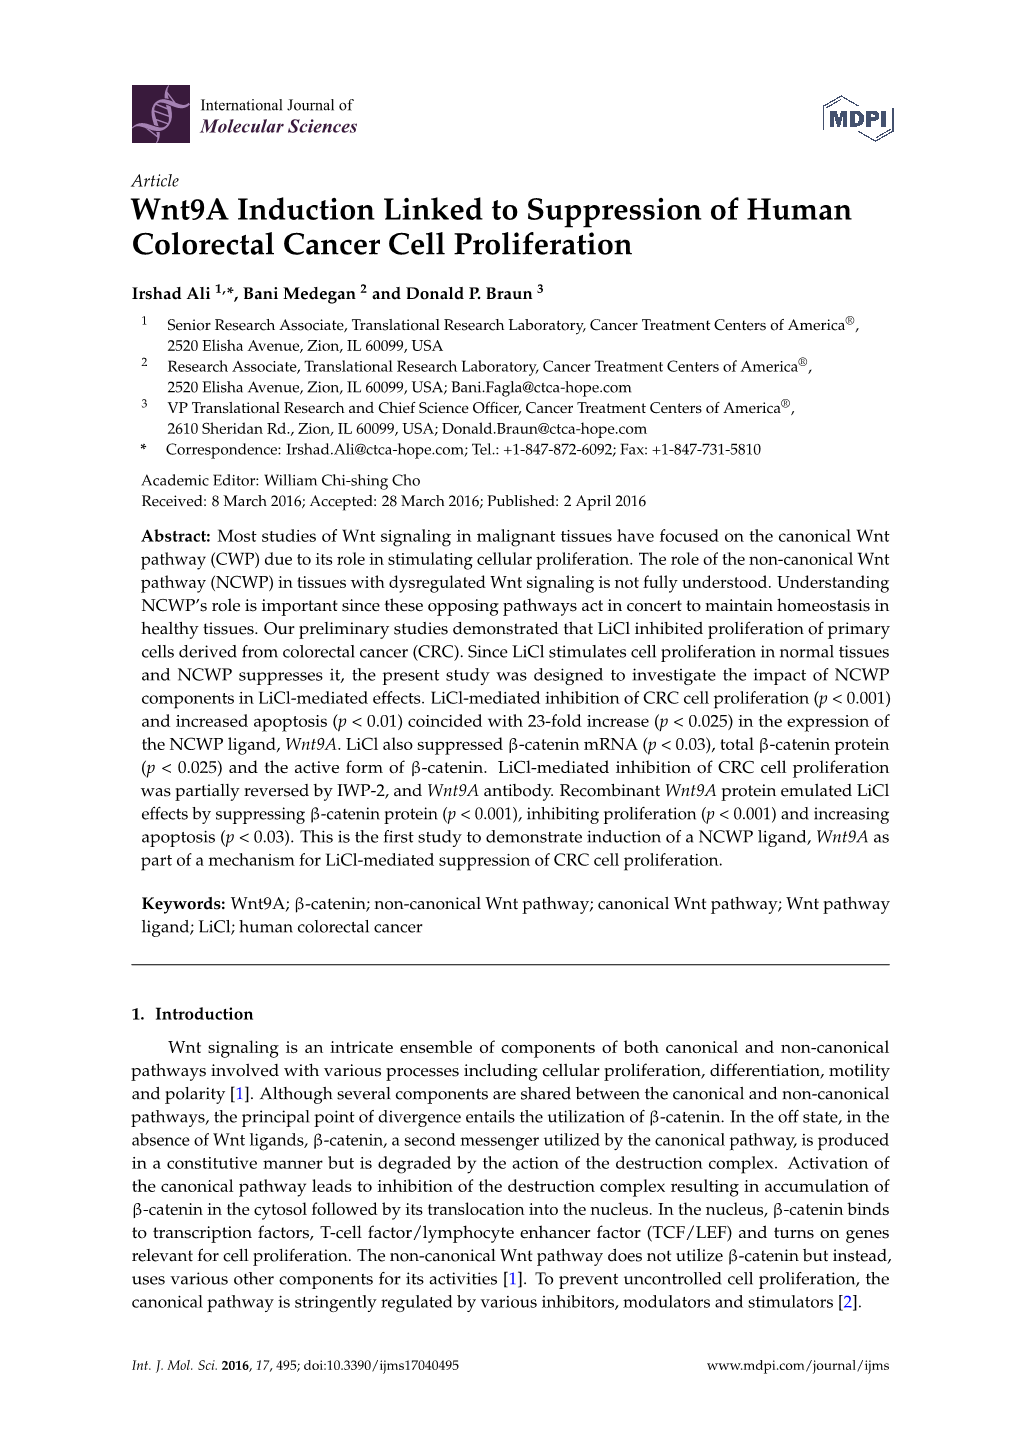 Wnt9a Induction Linked to Suppression of Human Colorectal Cancer Cell Proliferation